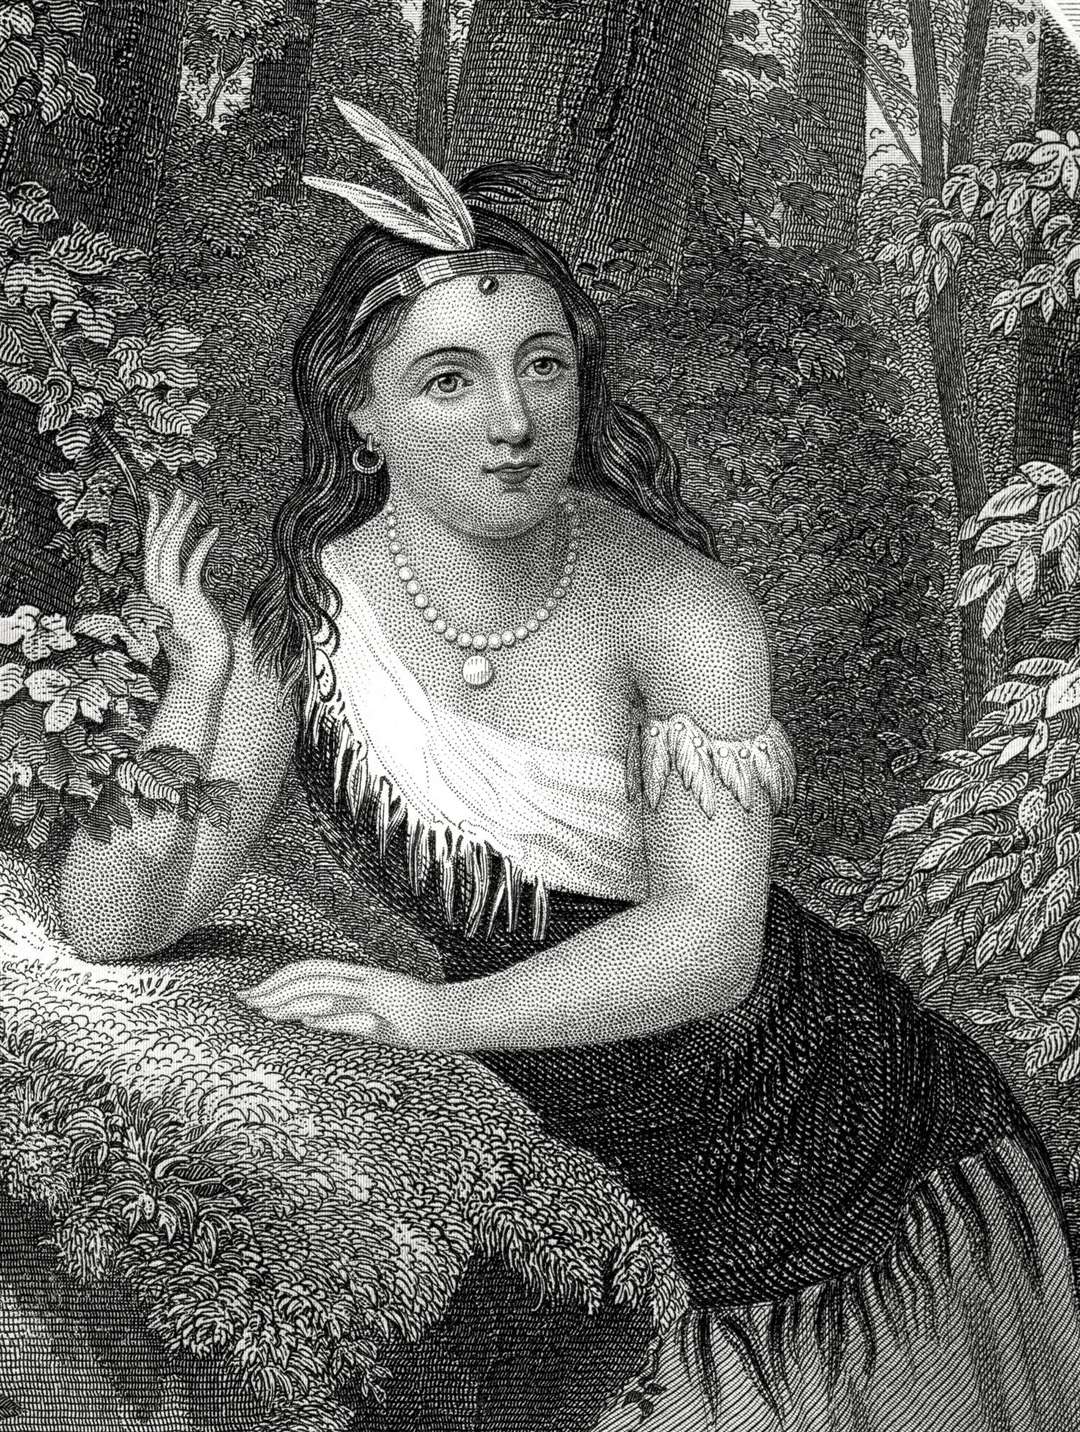 Engraving from 1885 featuring a depiction of Pocahontas who lived from about 1595 until 1617. Picture: istock/traveler1116